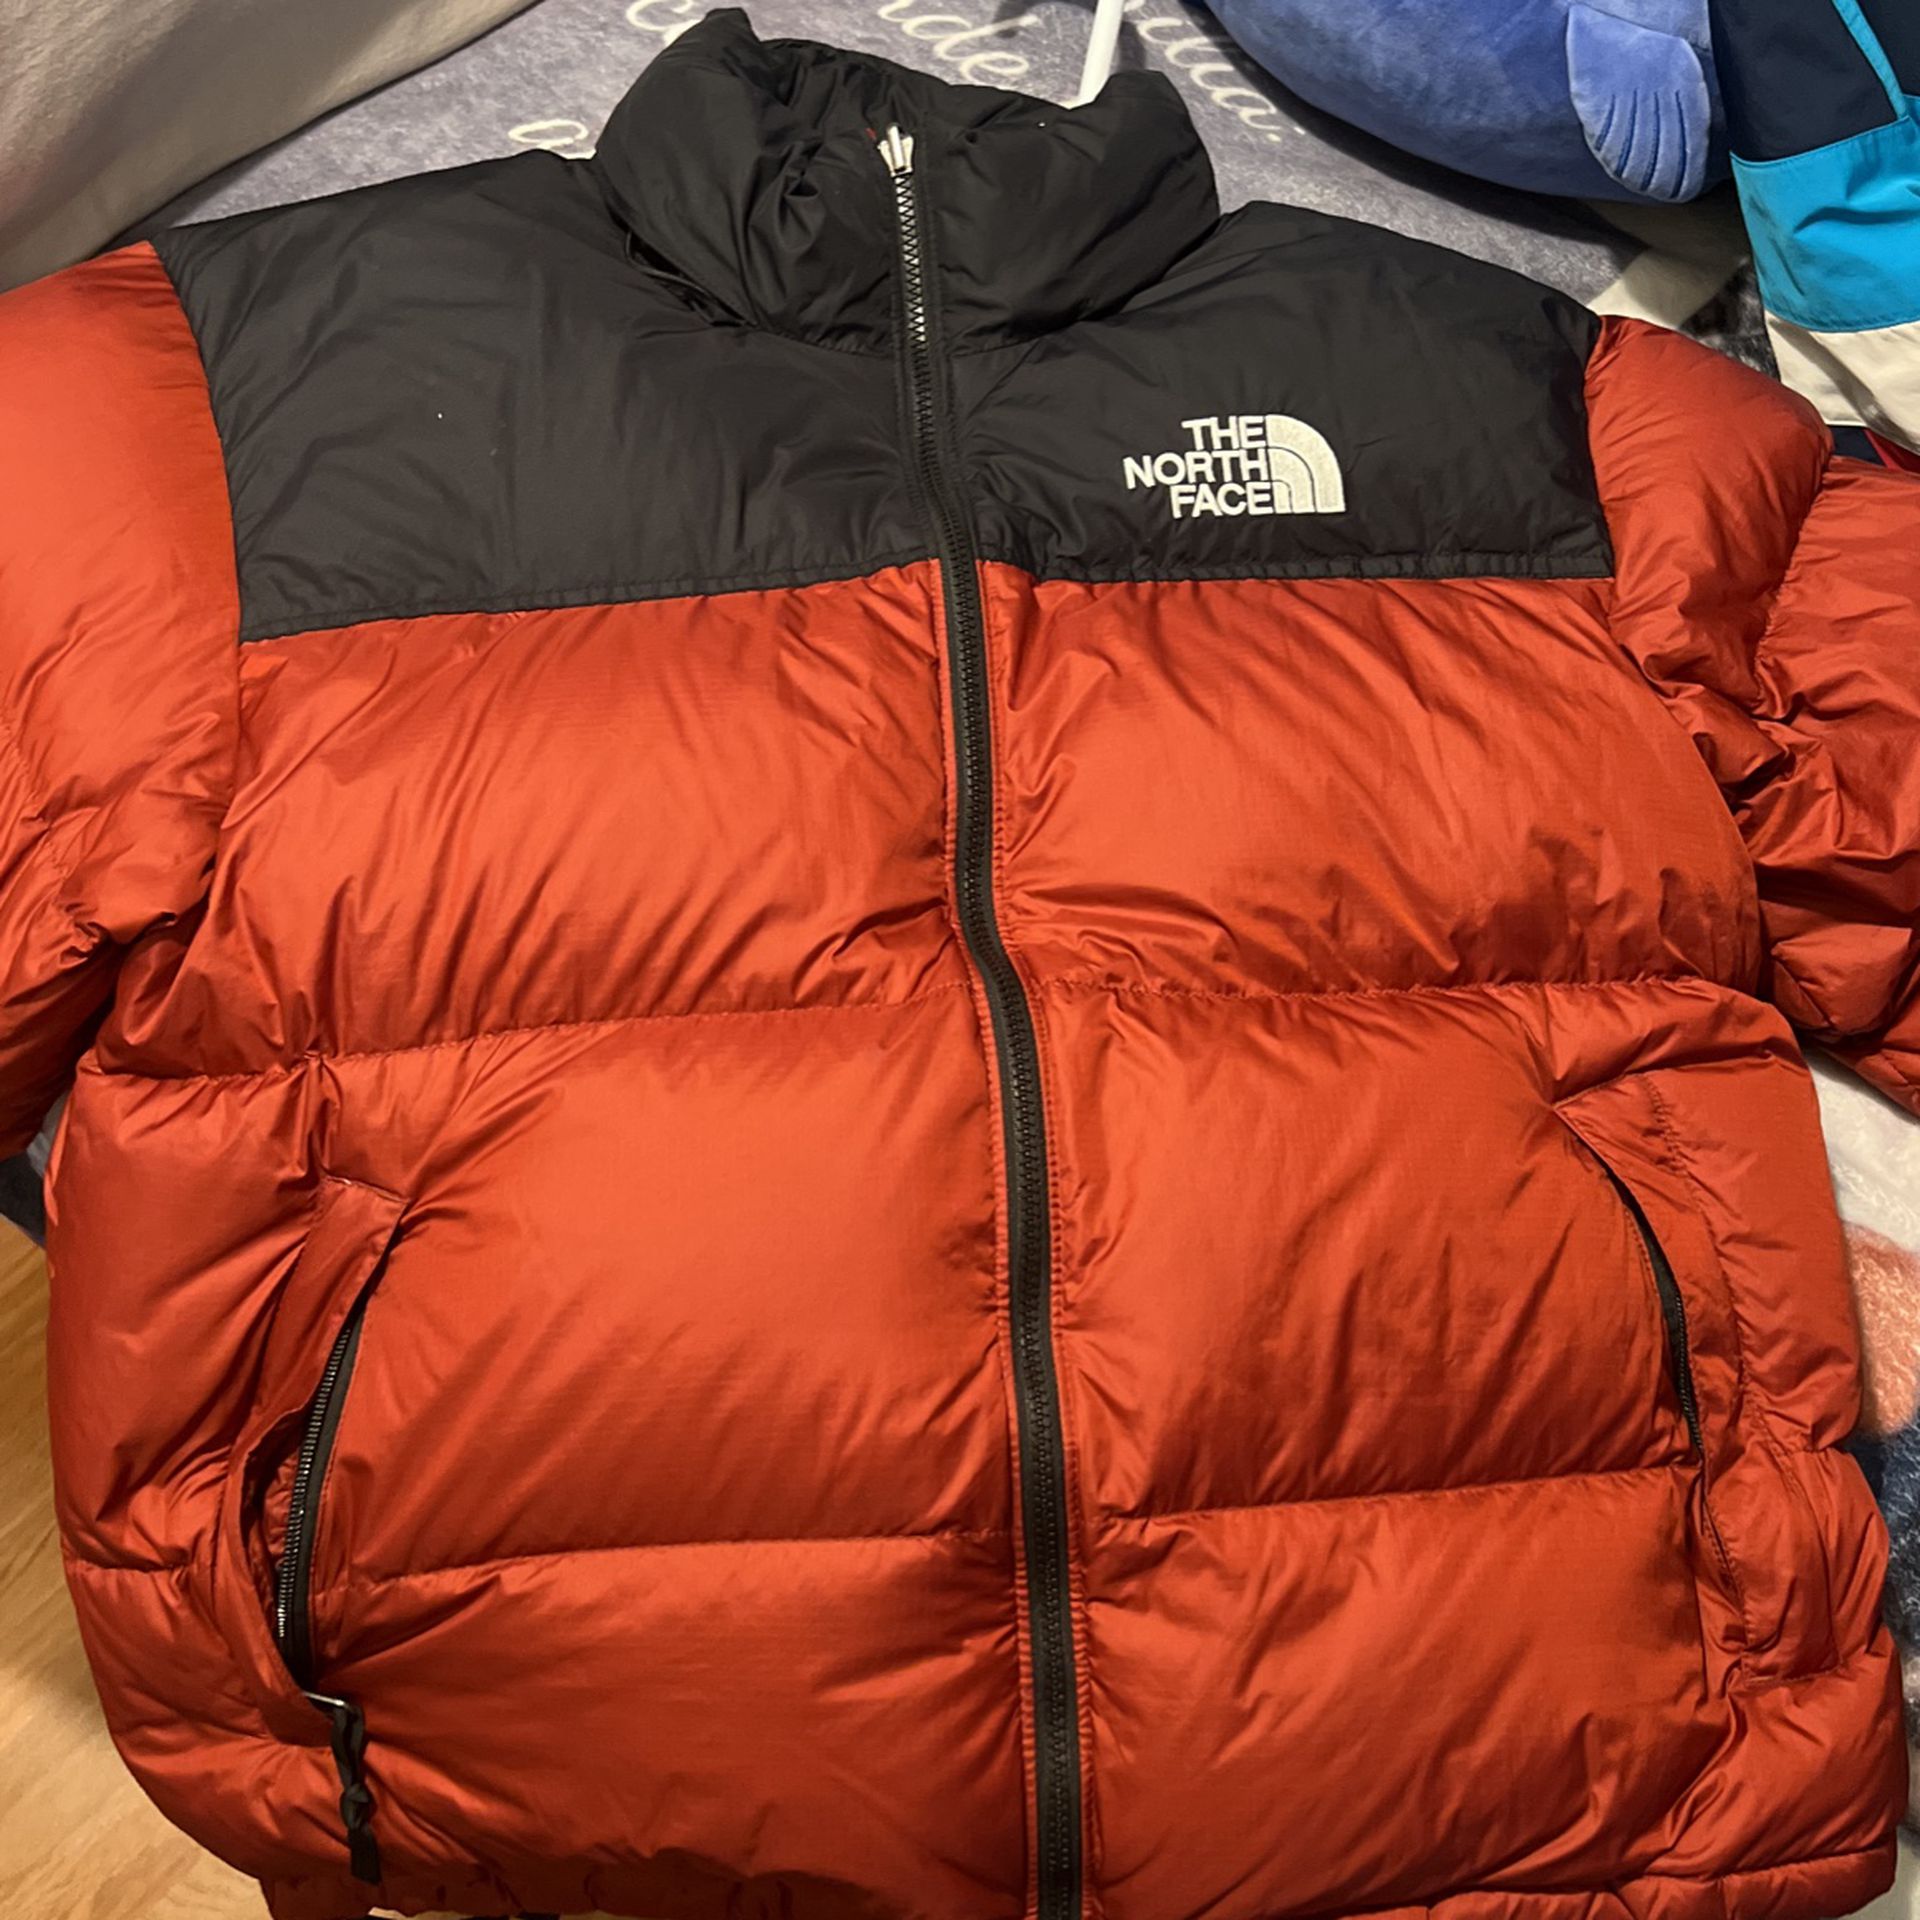 The North Face Jacket 700 Size L